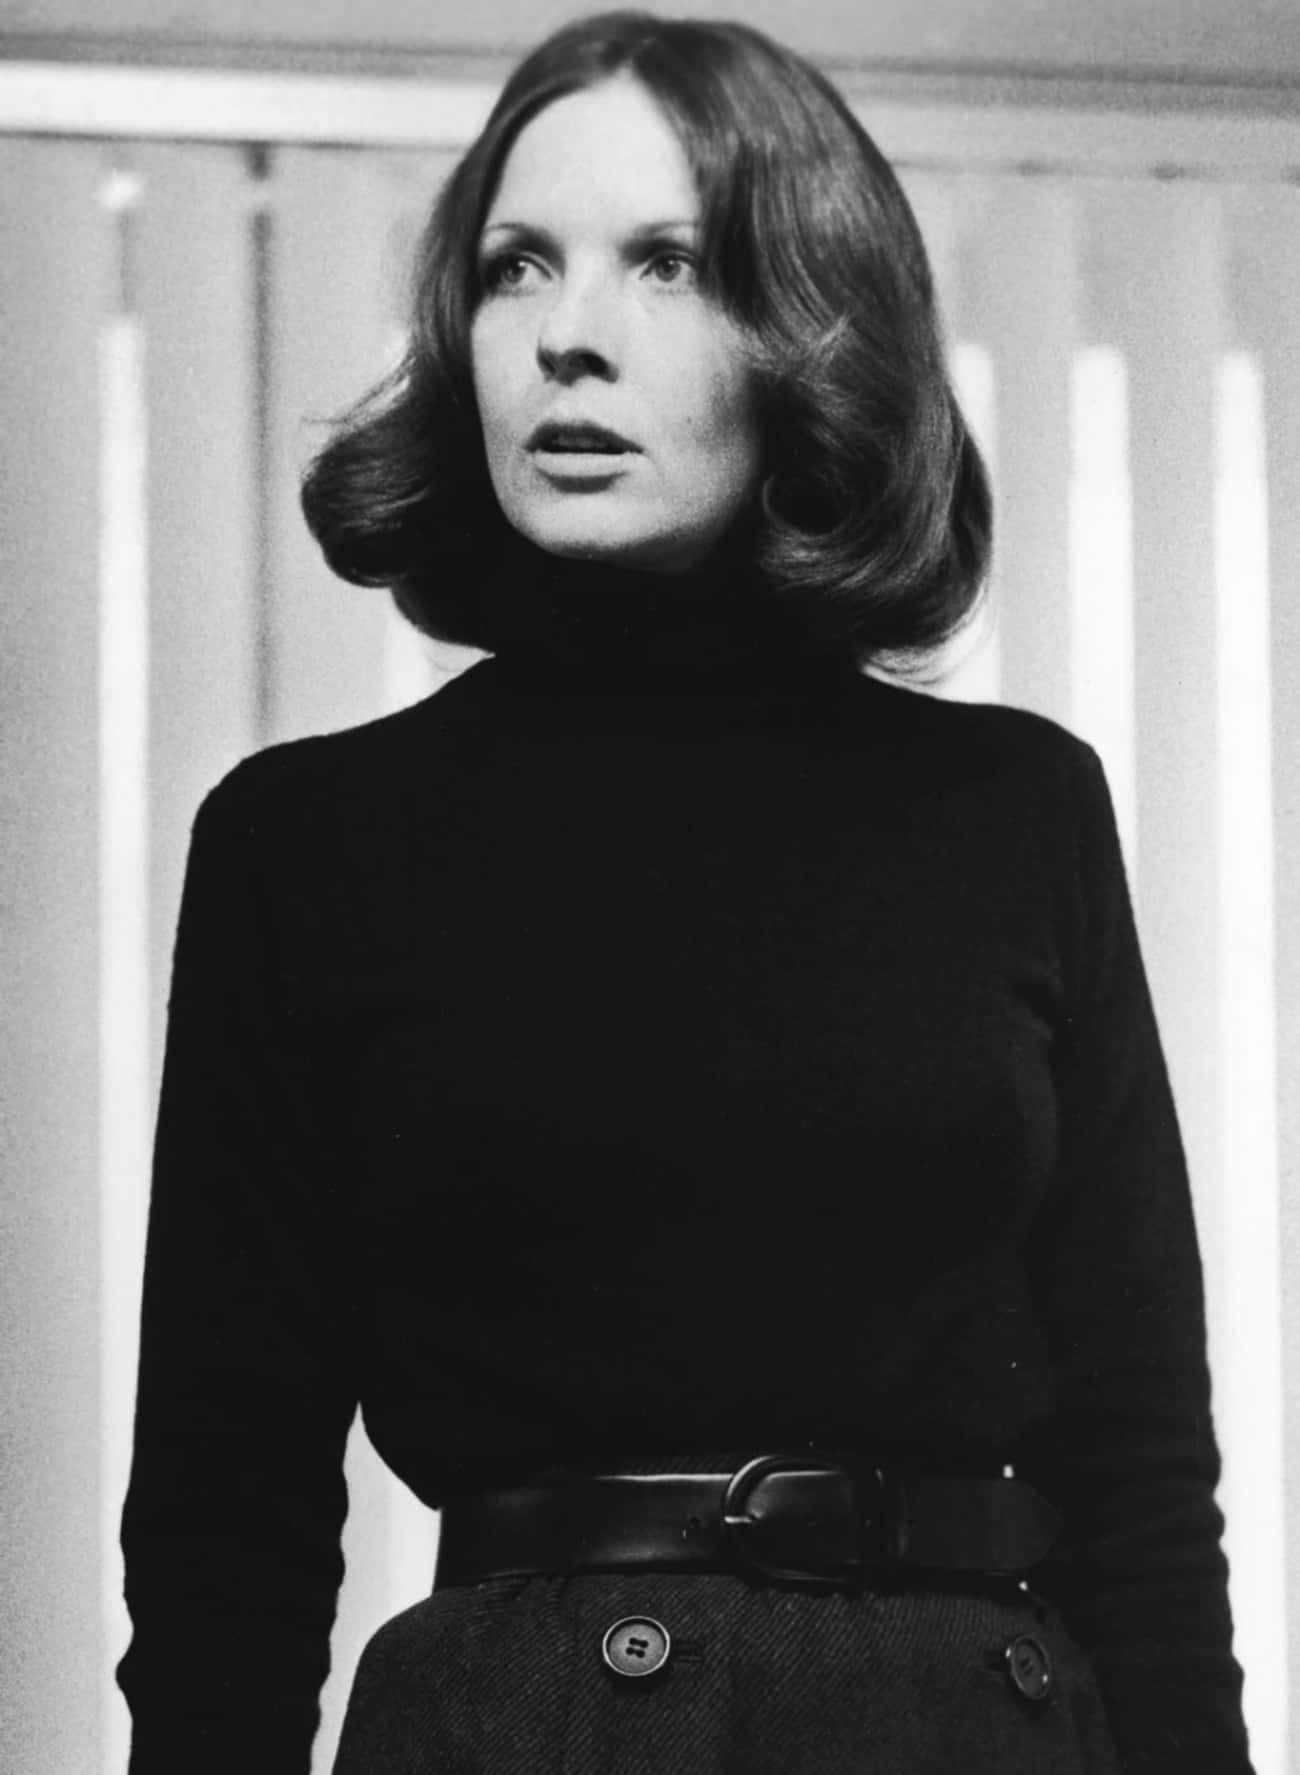 Young Diane Keaton in a Black Shirt and Black Pants